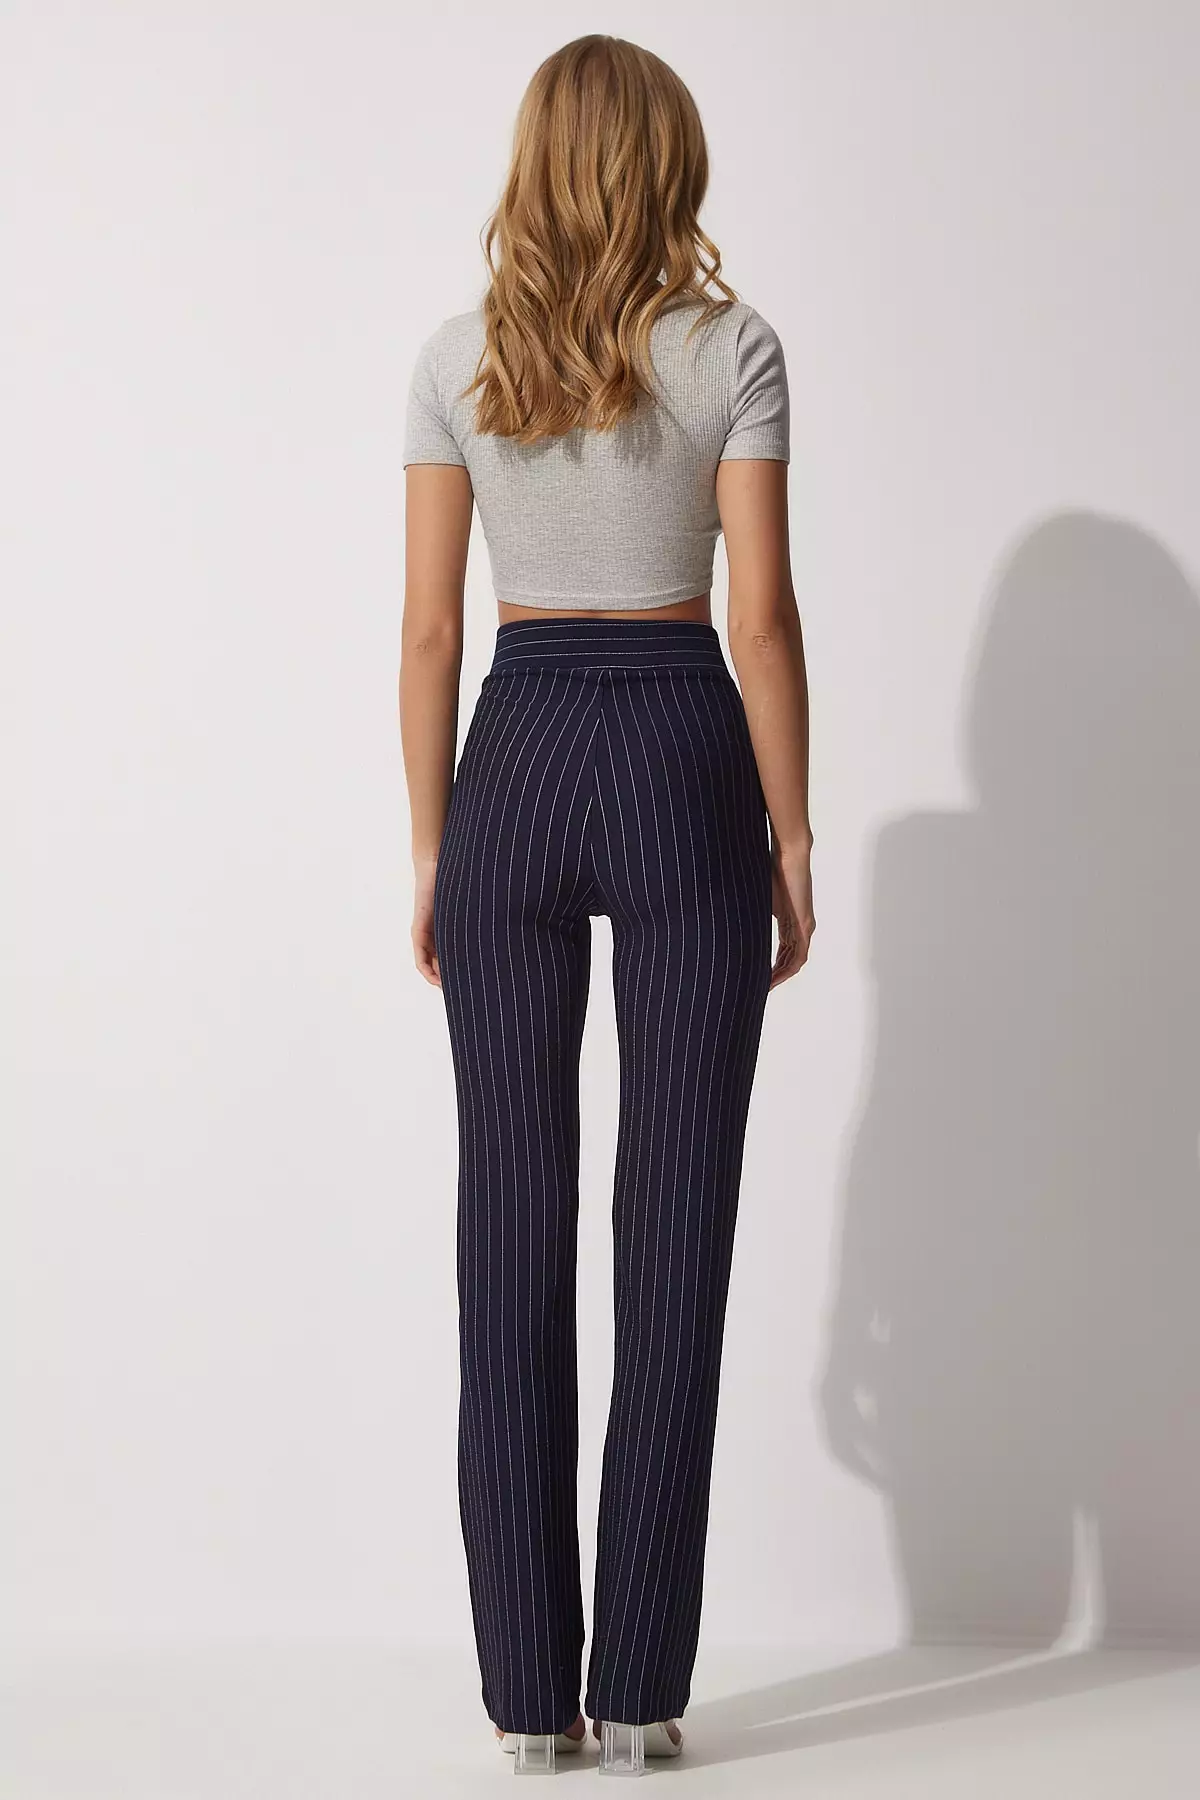 Happiness Istanbul High Waist Striped Pants 2024